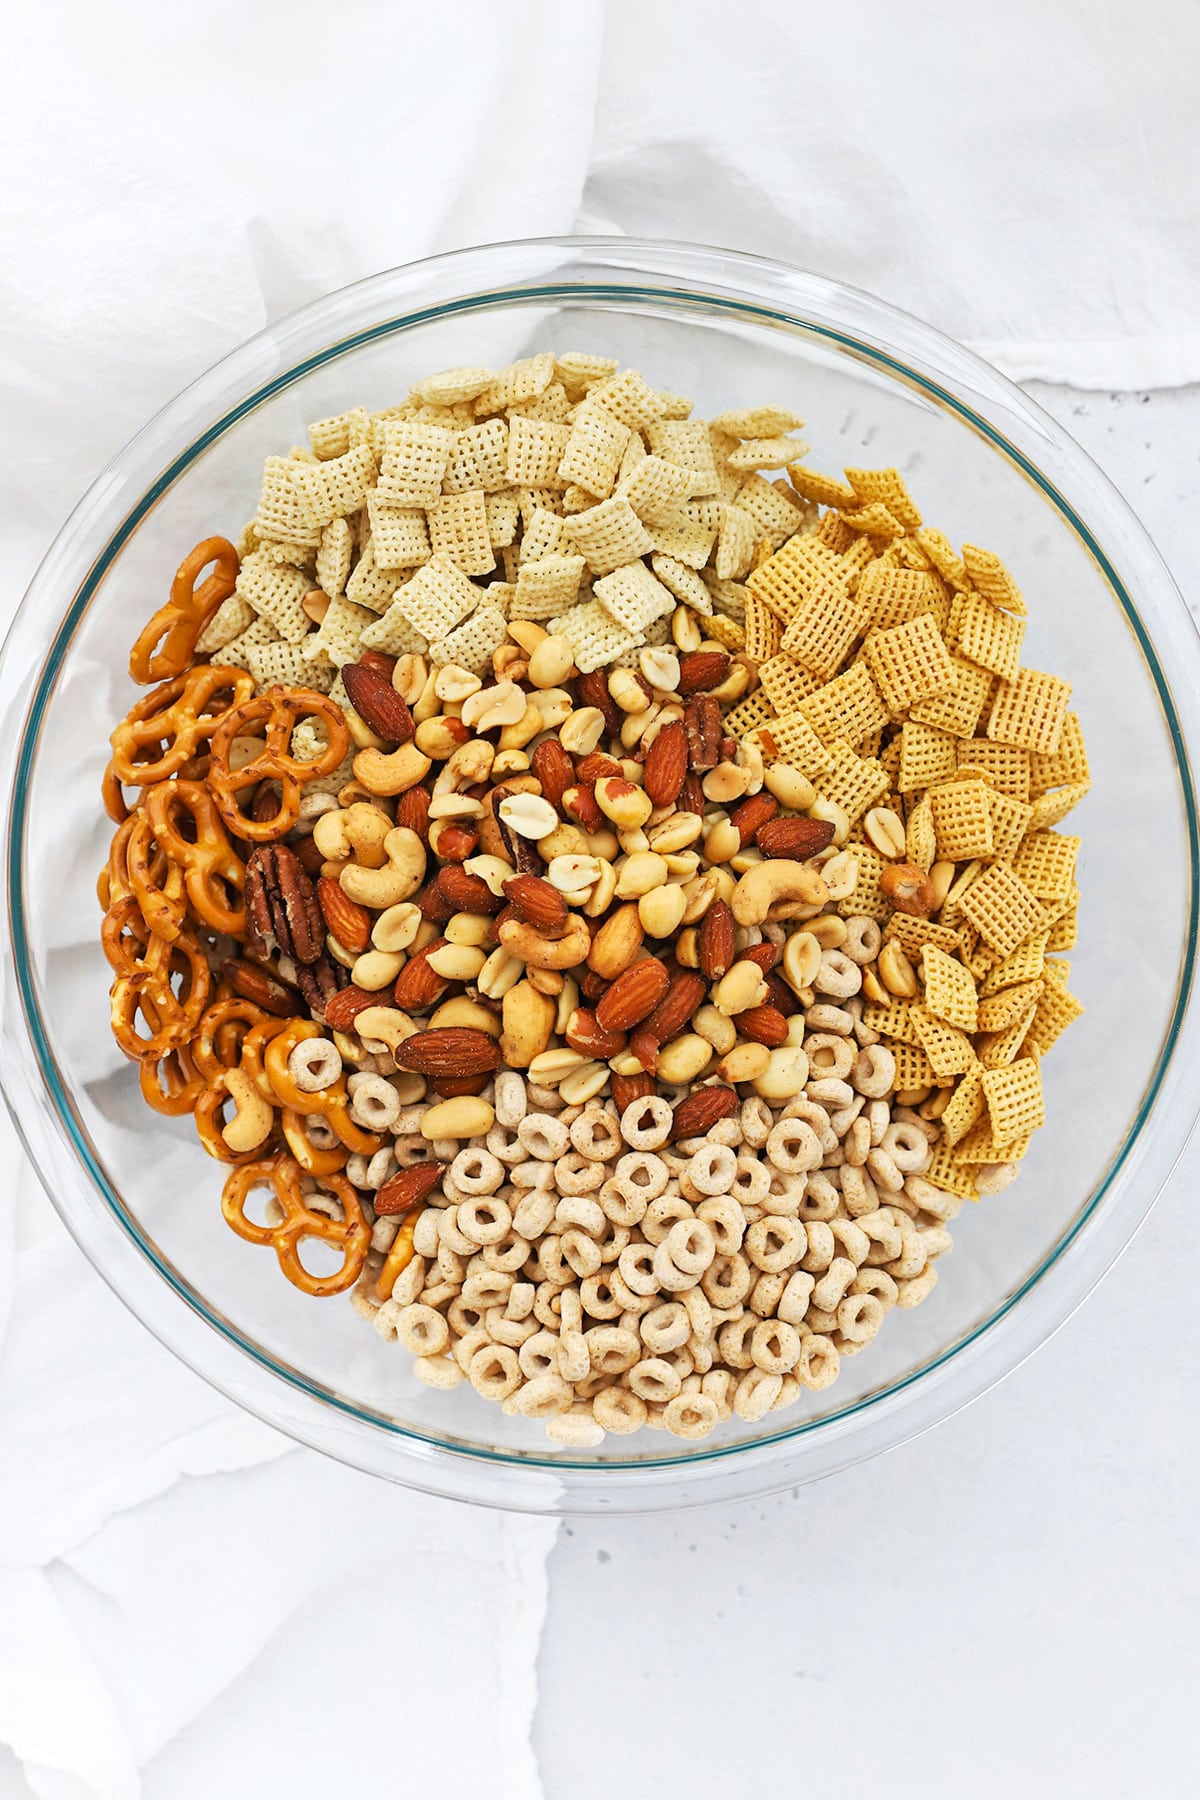 Combining gluten-free pretzels, Chex cereal, cheerios, and mixed nuts to make savory gluten-free Chex mix